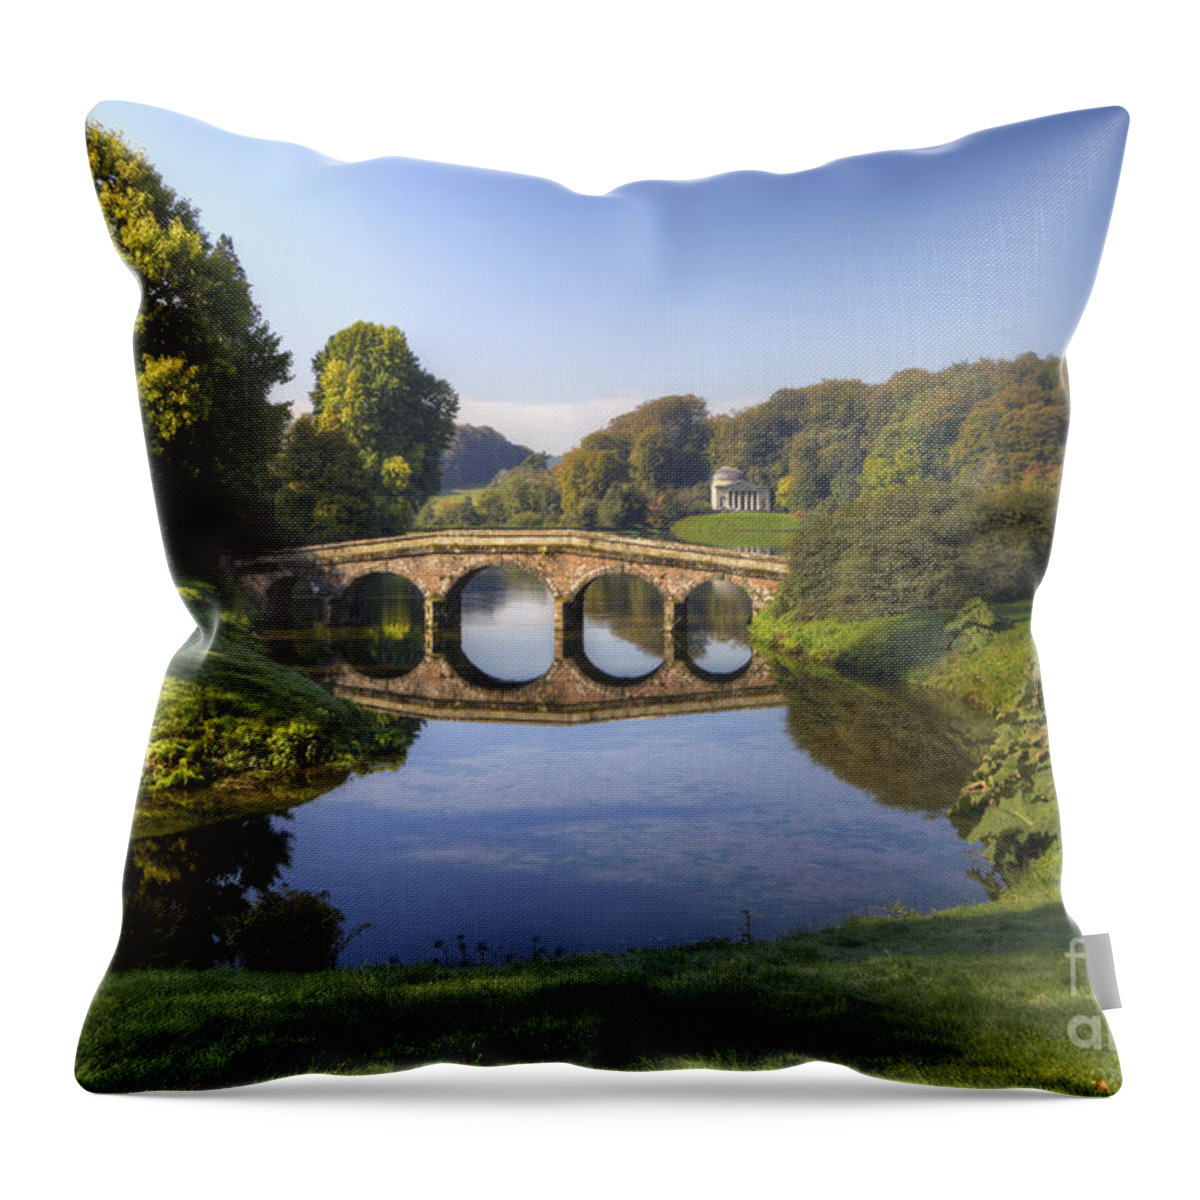 Clare Bambers Throw Pillow featuring the photograph Palladian Bridge at Stourhead. by Clare Bambers